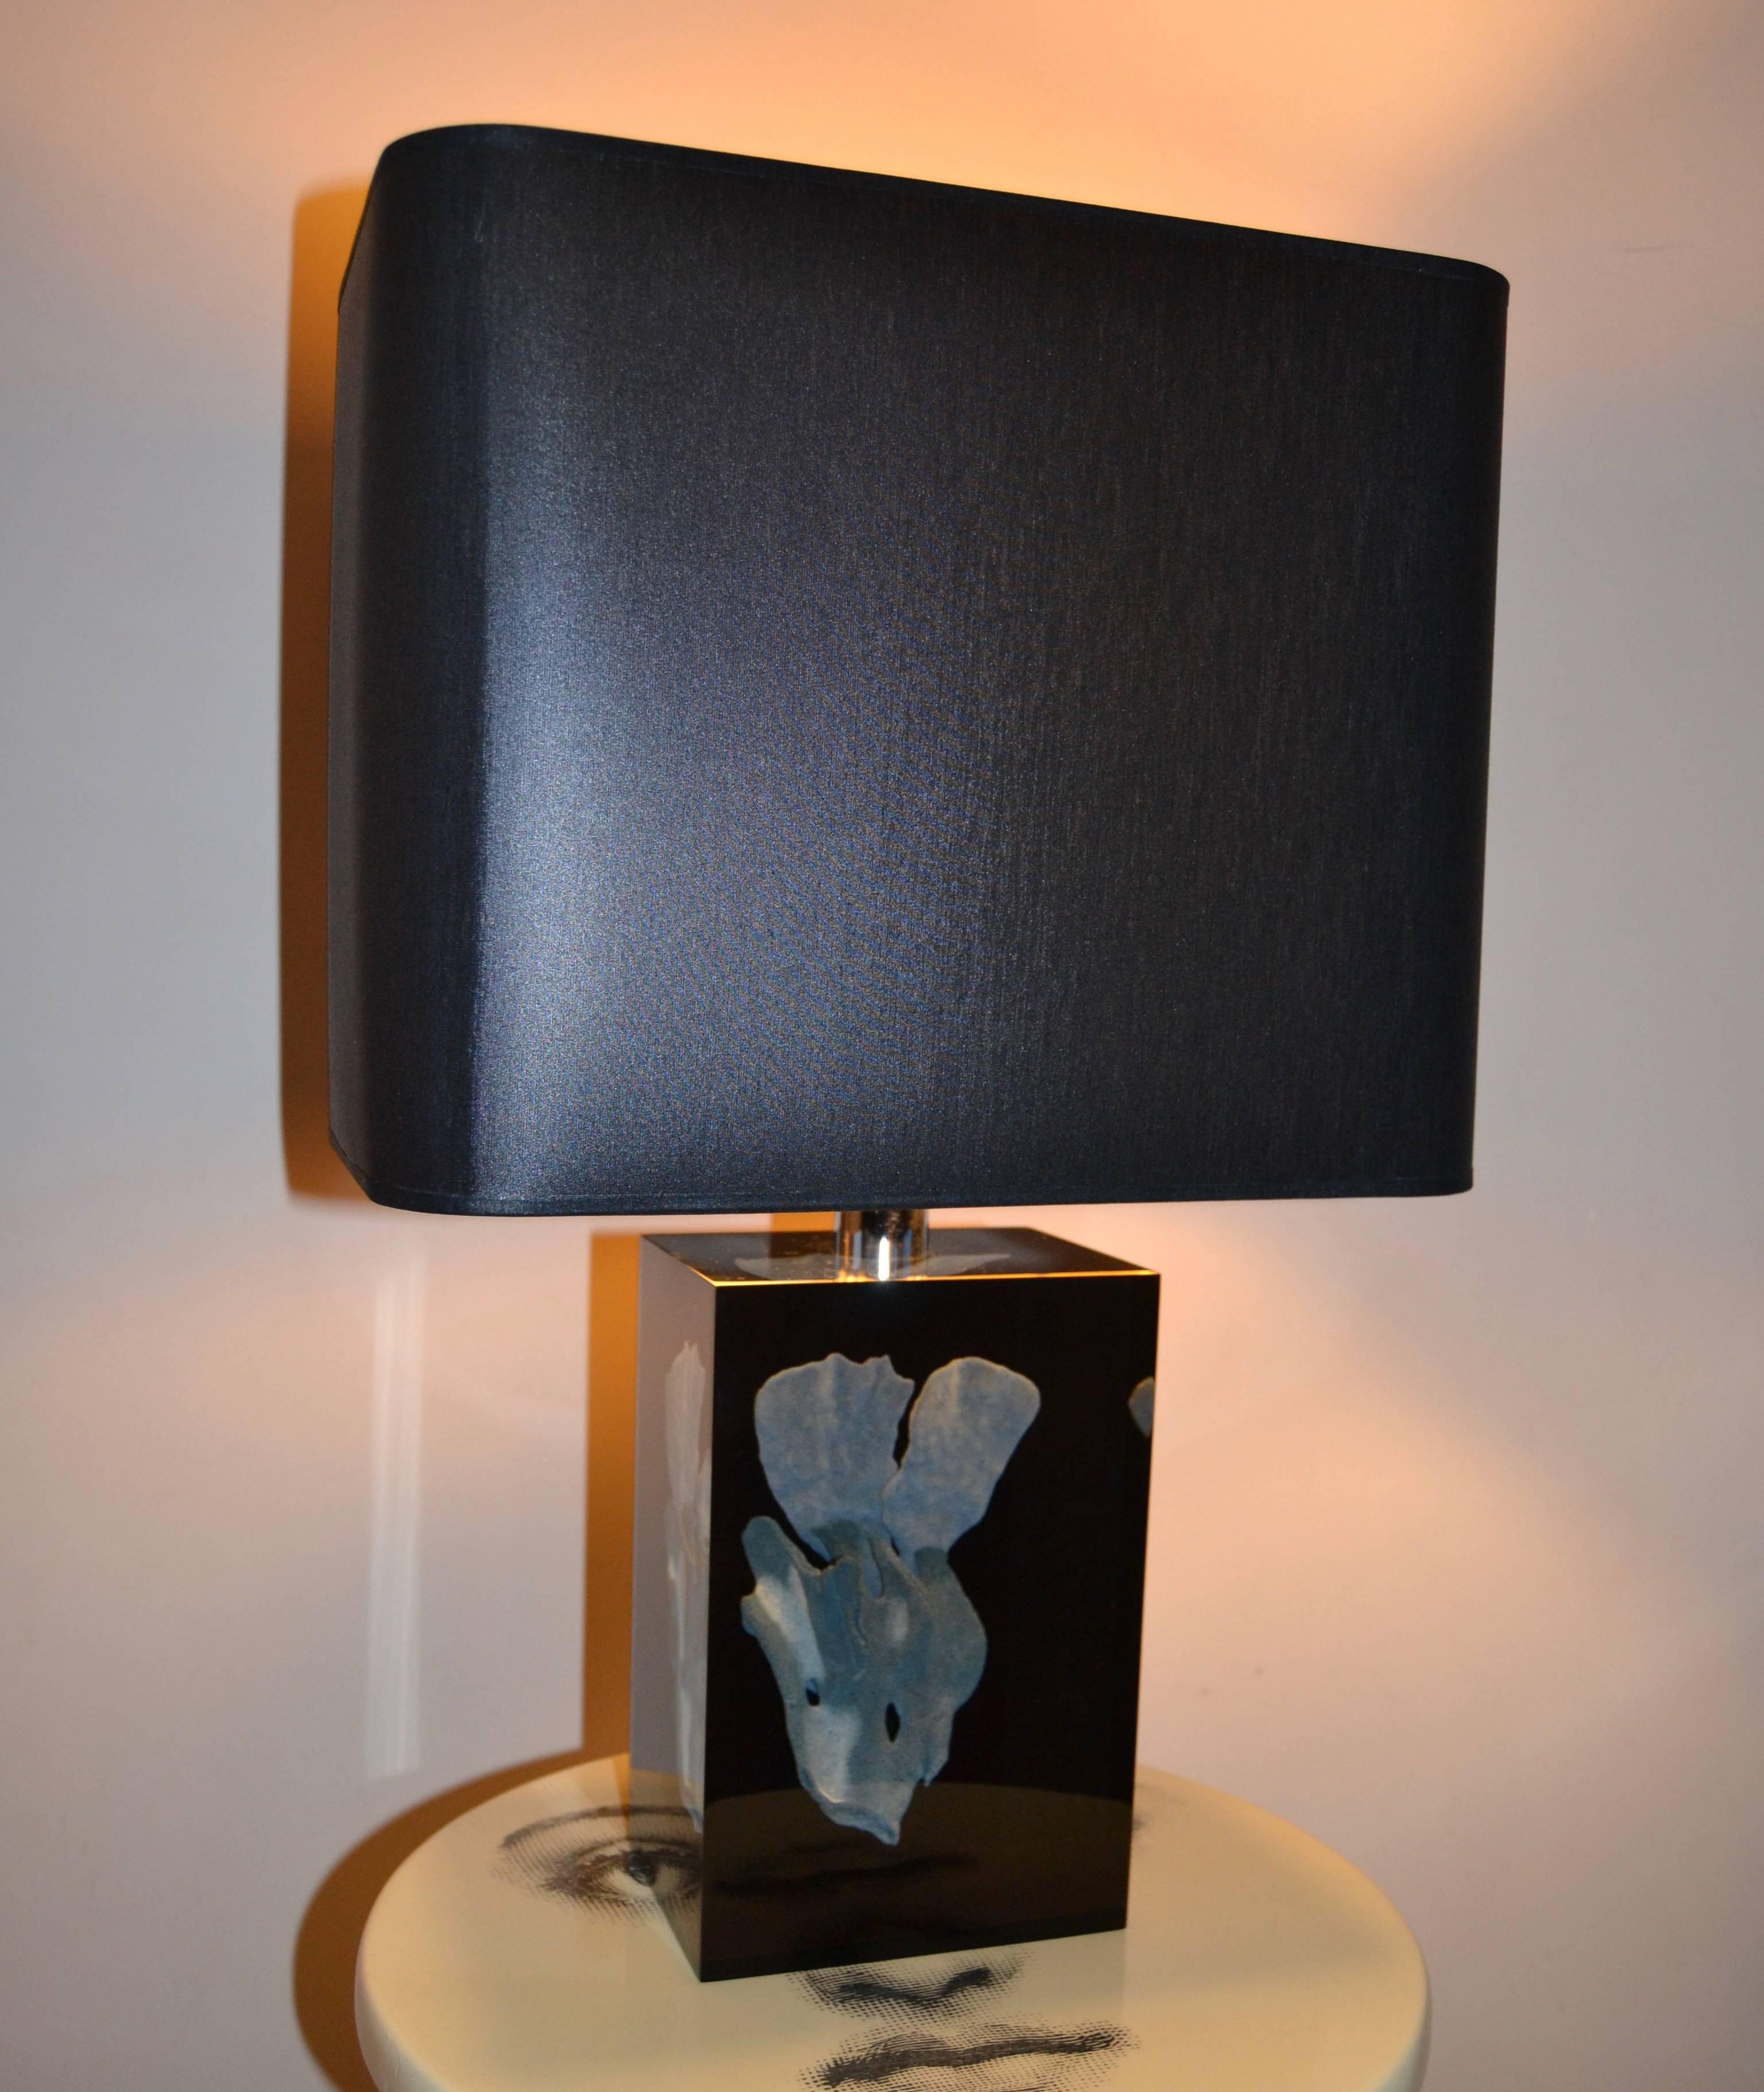 1970s clear Lucite with Inlaid bleu coral specimen table lamp;
Rewired with new shade in black and gold interior.
Great Vintage condition.